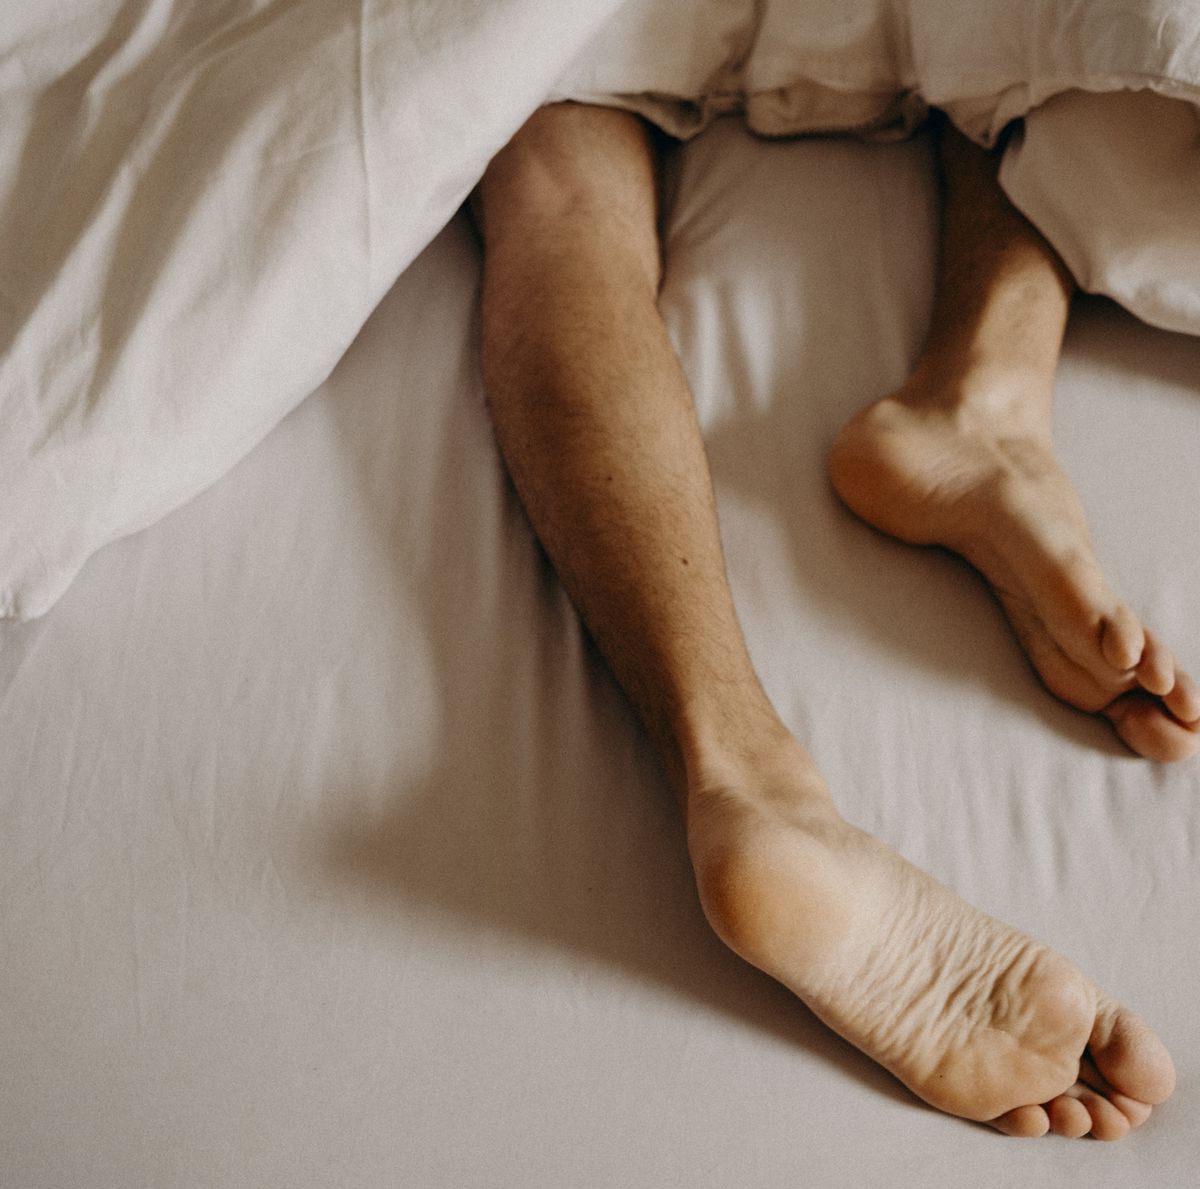 What Do You Do When Pants Bother Restless Legs Syndrome?